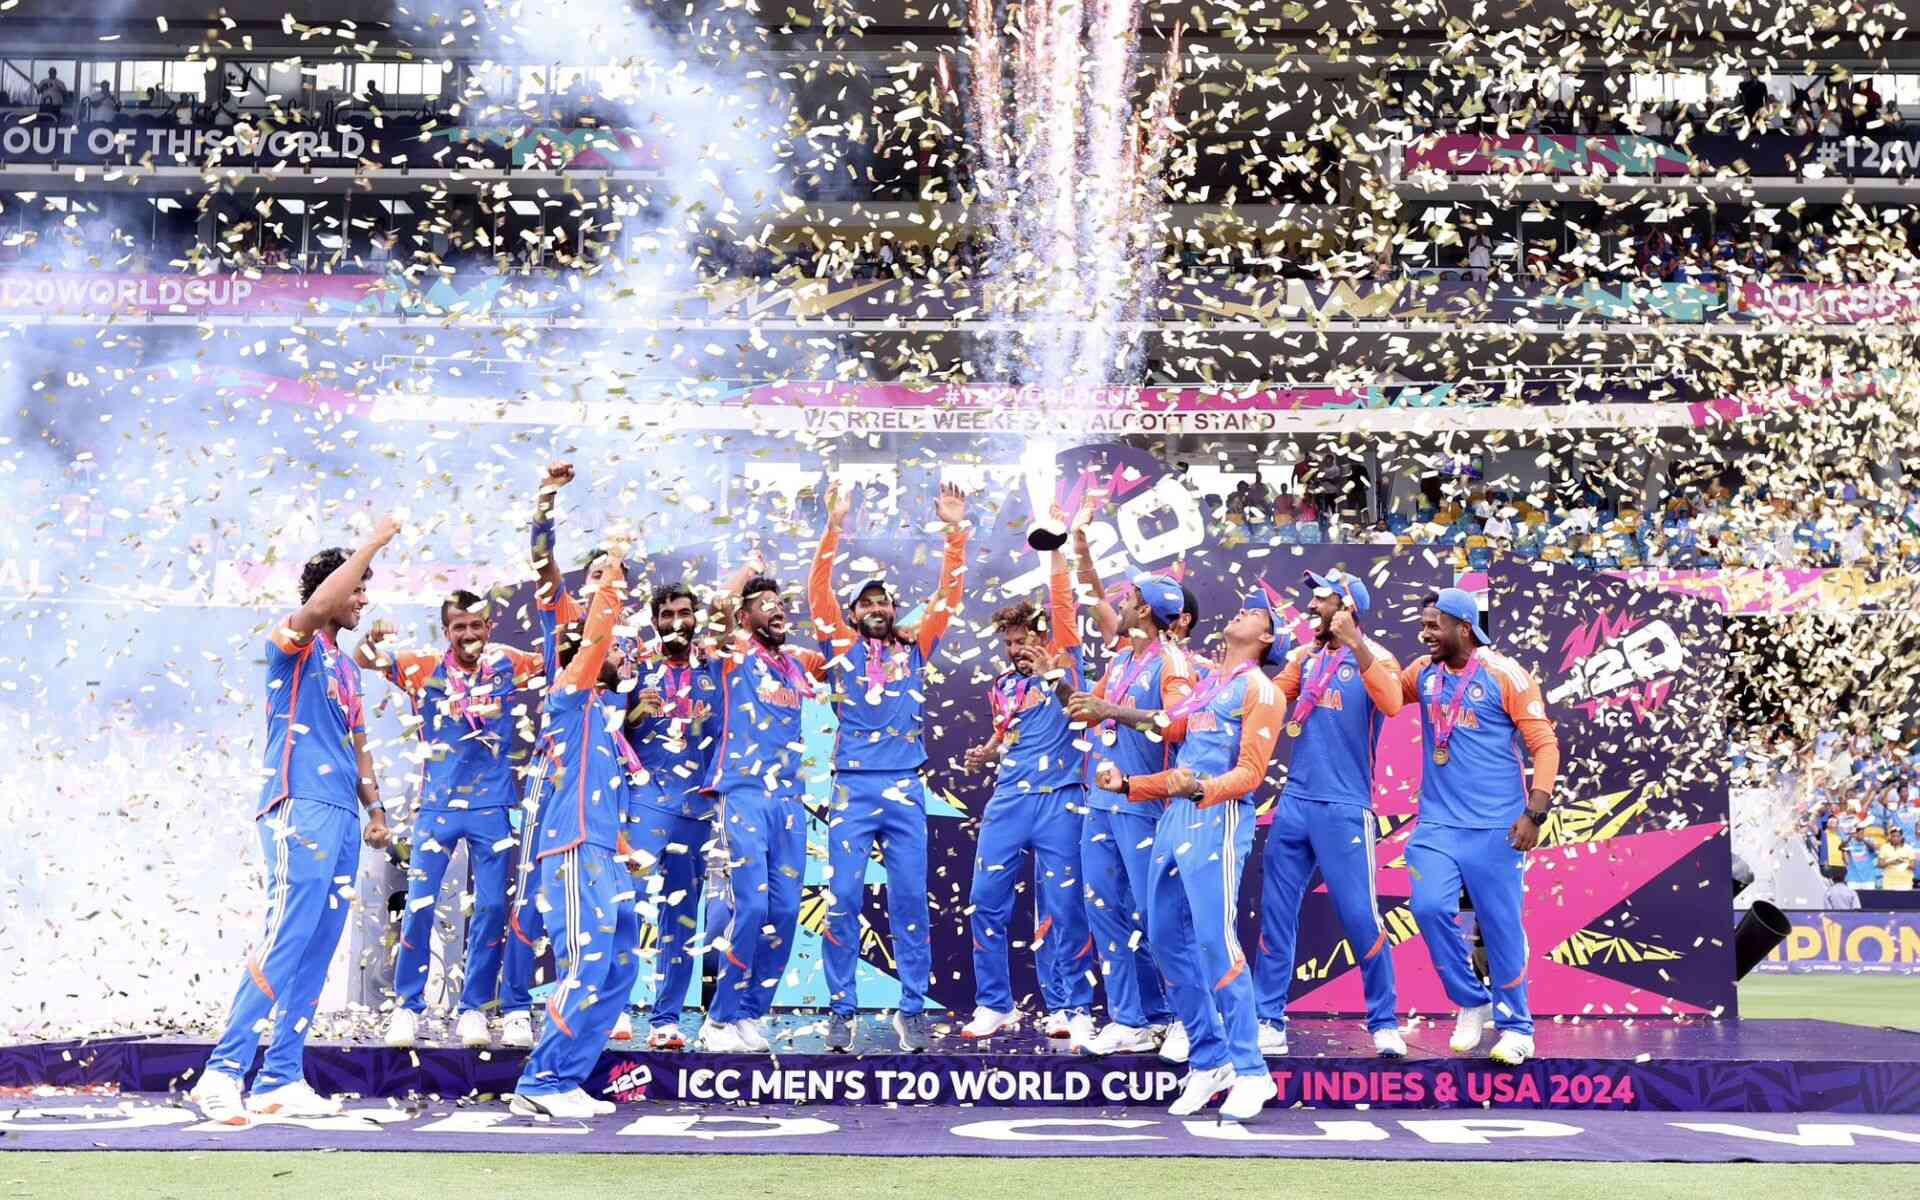 When And Where To Watch India’s T20 World Cup 2024 Winning Mumbai Parade?